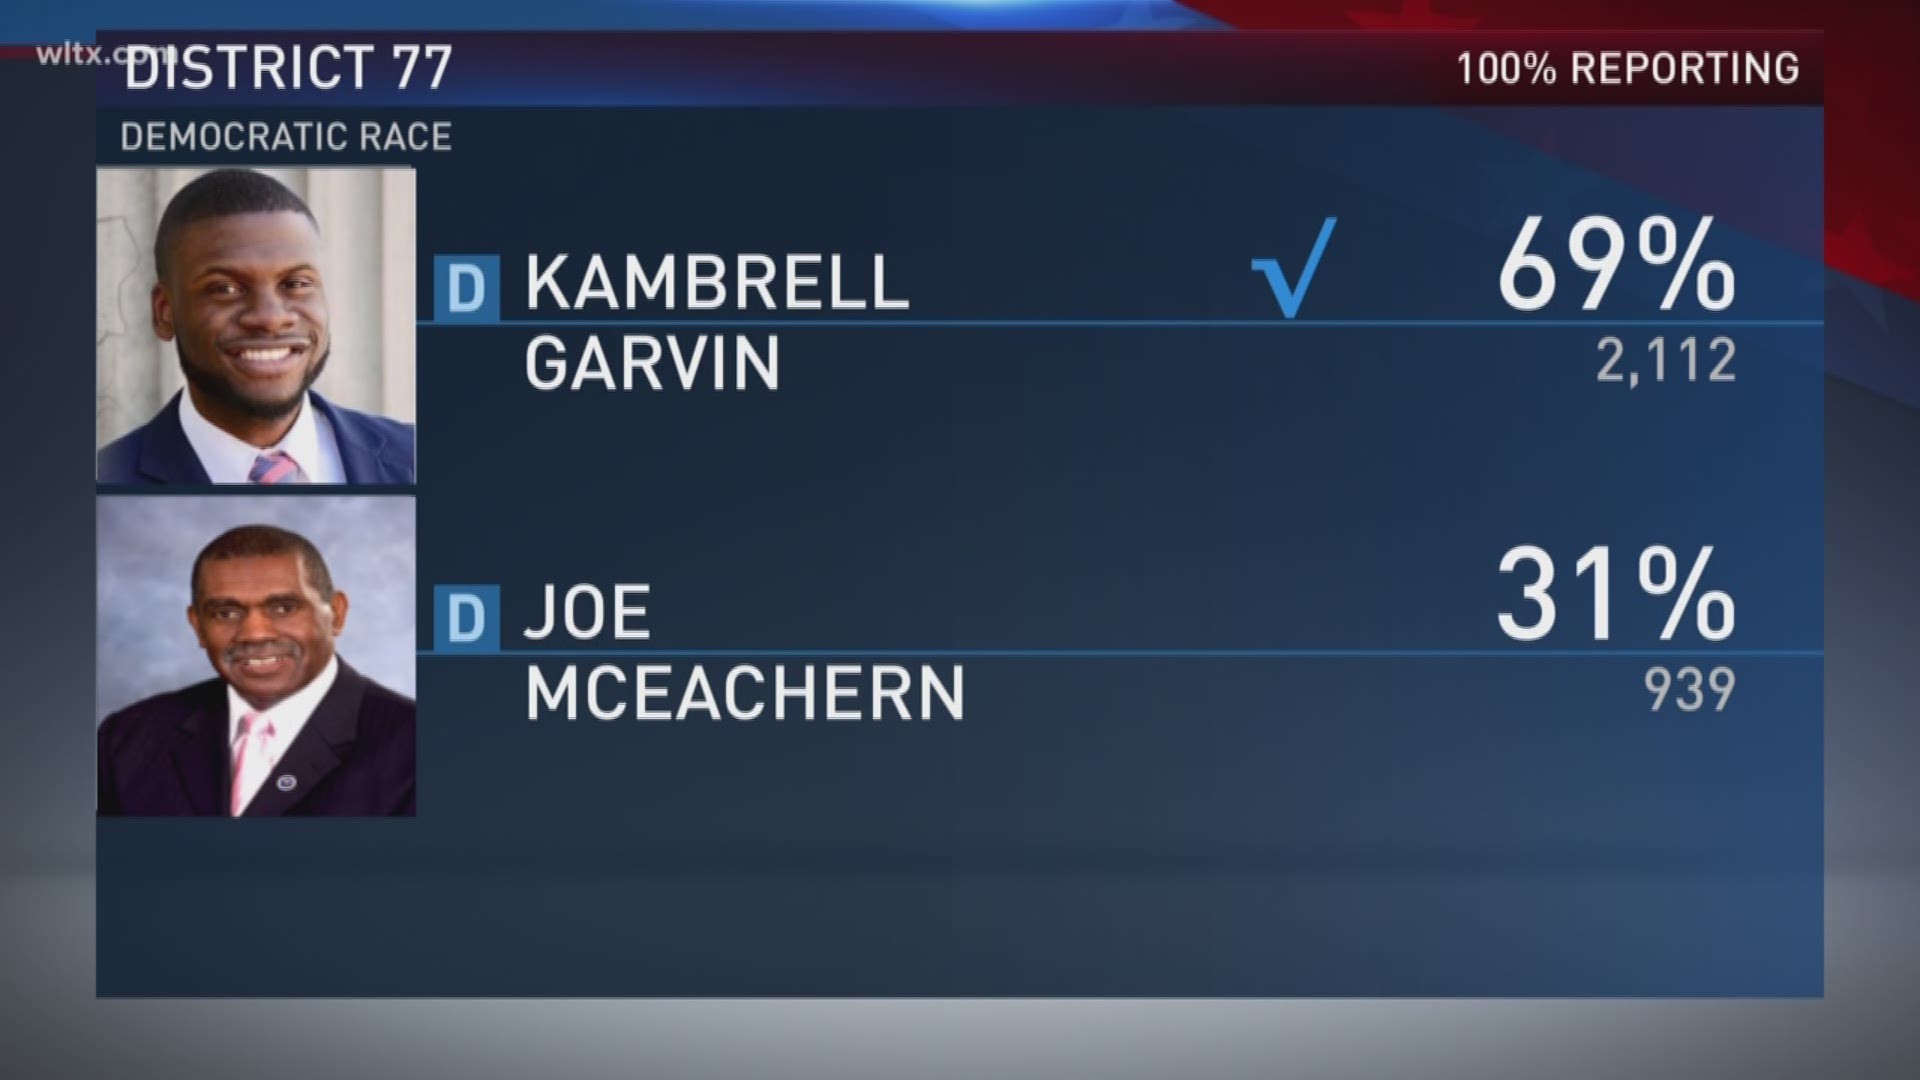 Political newcomer Kambrell Garvin upset incumbent Rep. Joe McEachern in the Democratic primary for the SC House District 77 seat.